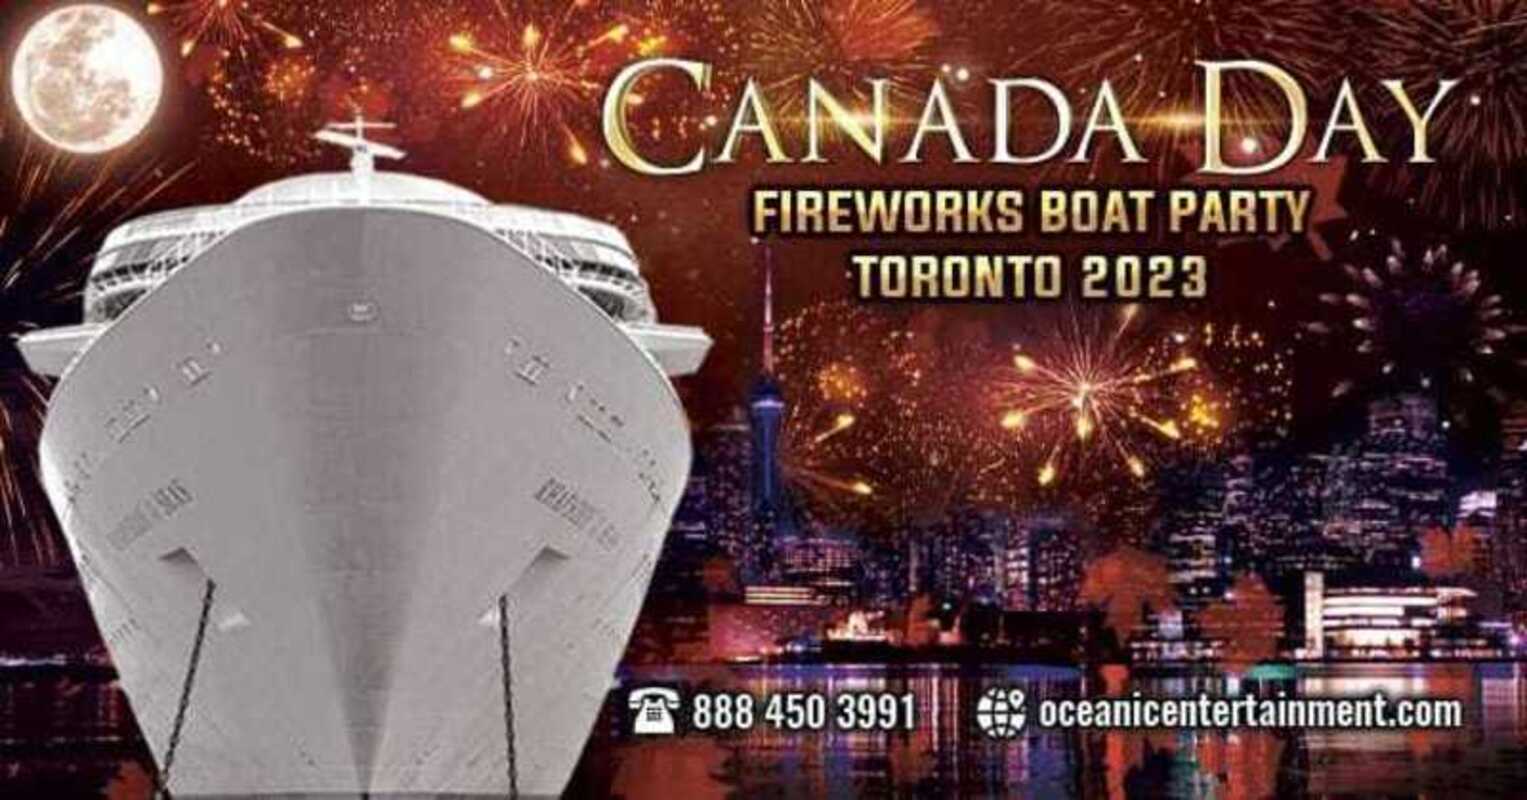 Canada Day Fireworks Boat Party Toronto 2023